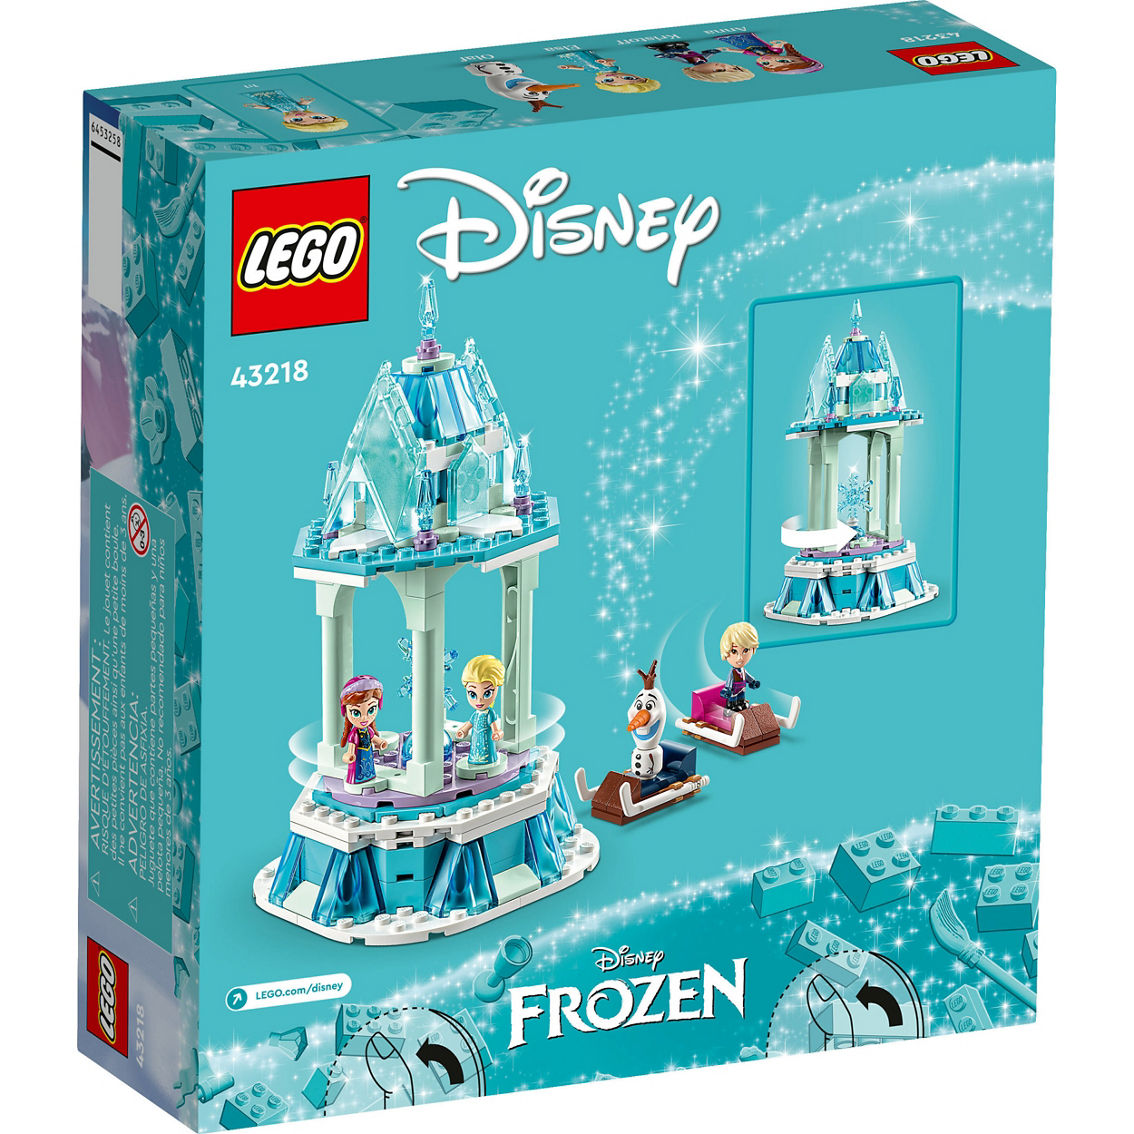 LEGO Disney Anna and Elsa's Magical Carousel 43218 Building Toy Set - Image 2 of 9